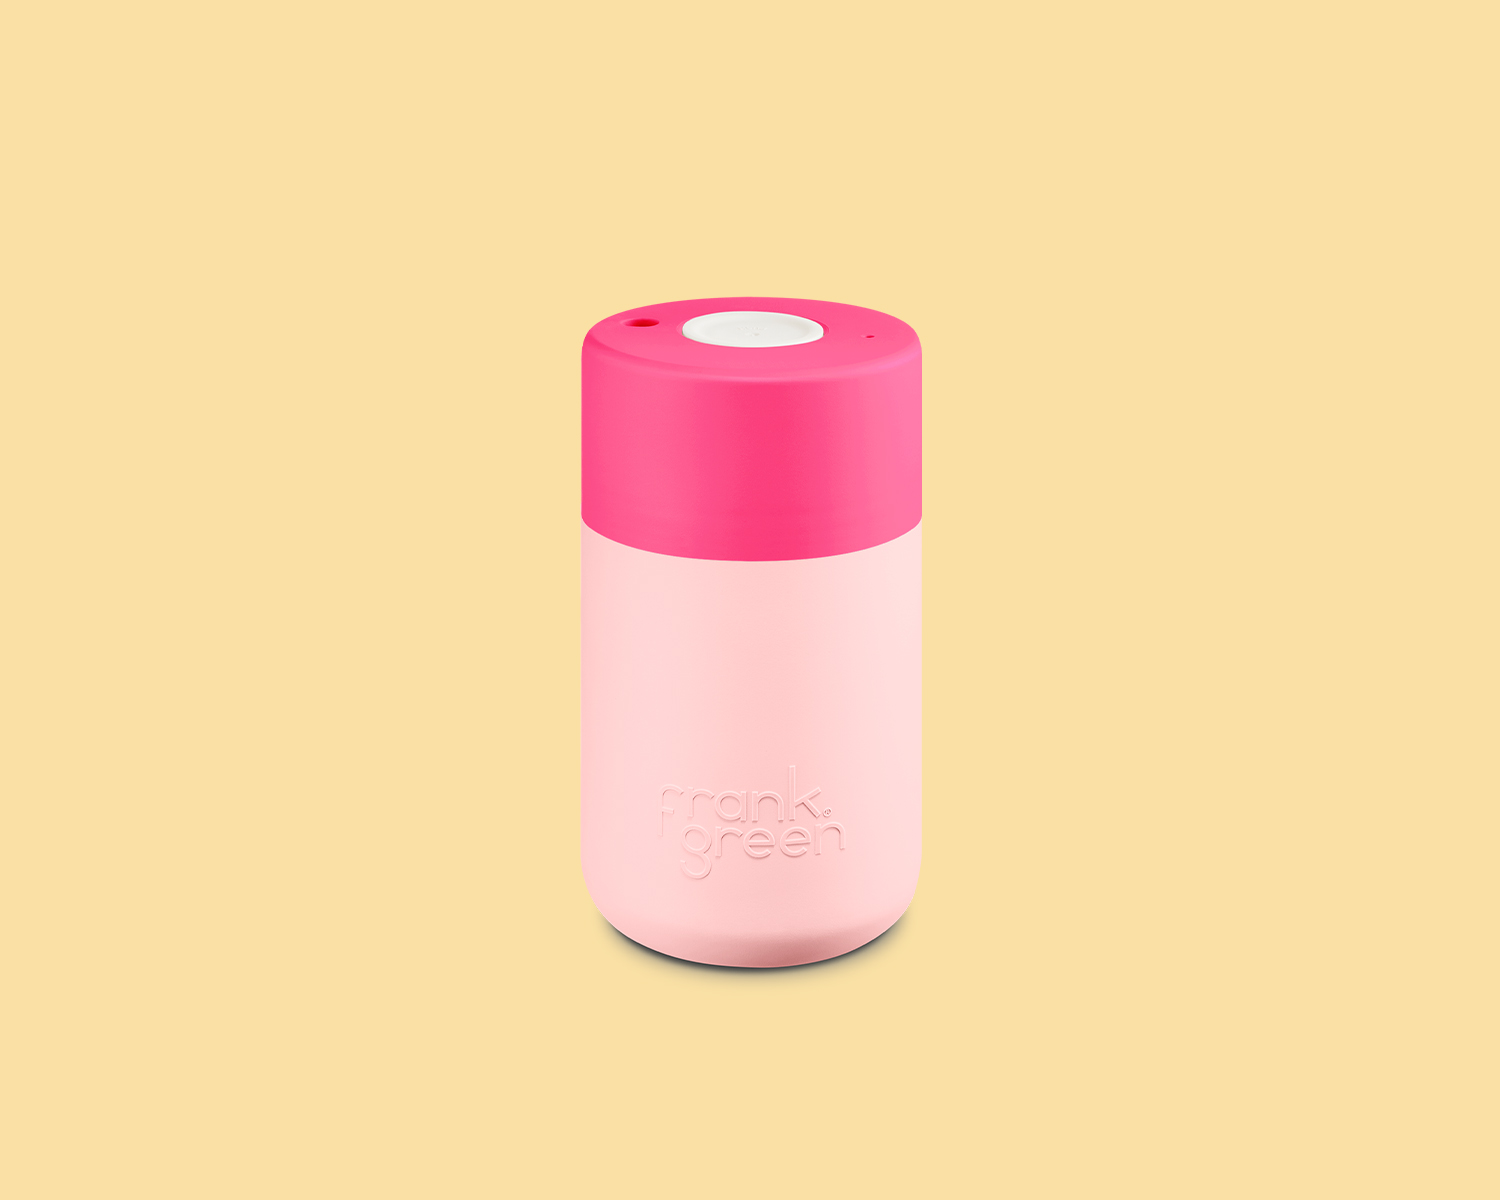 Blushed Original Reusable Cup 12oz / 340ml, Neon Pink lid and Cloud button